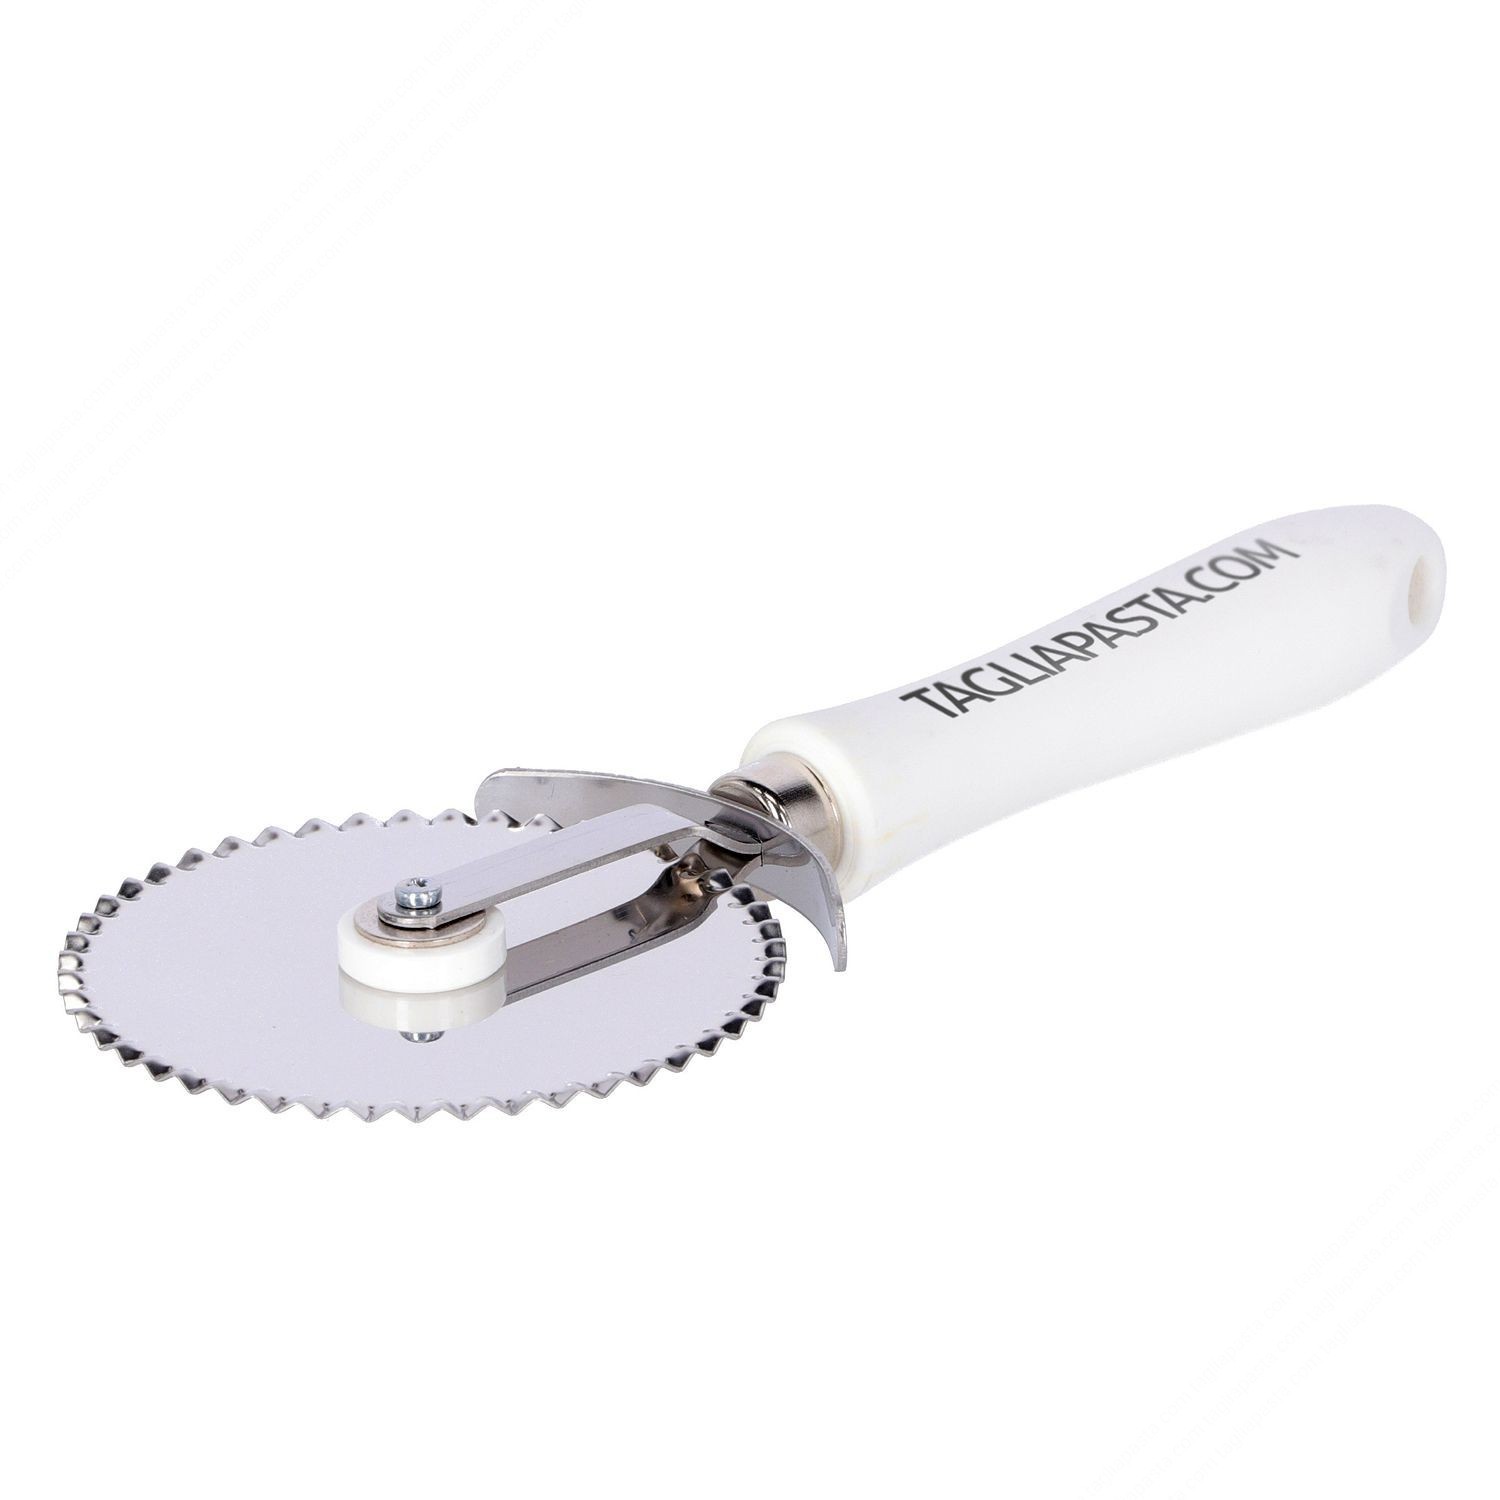 https://www.tagliapasta.com/696-thickbox_default/pizza-cookies-and-pies-cutter-with-stainless-steel-serrated-blade-88mm.jpg